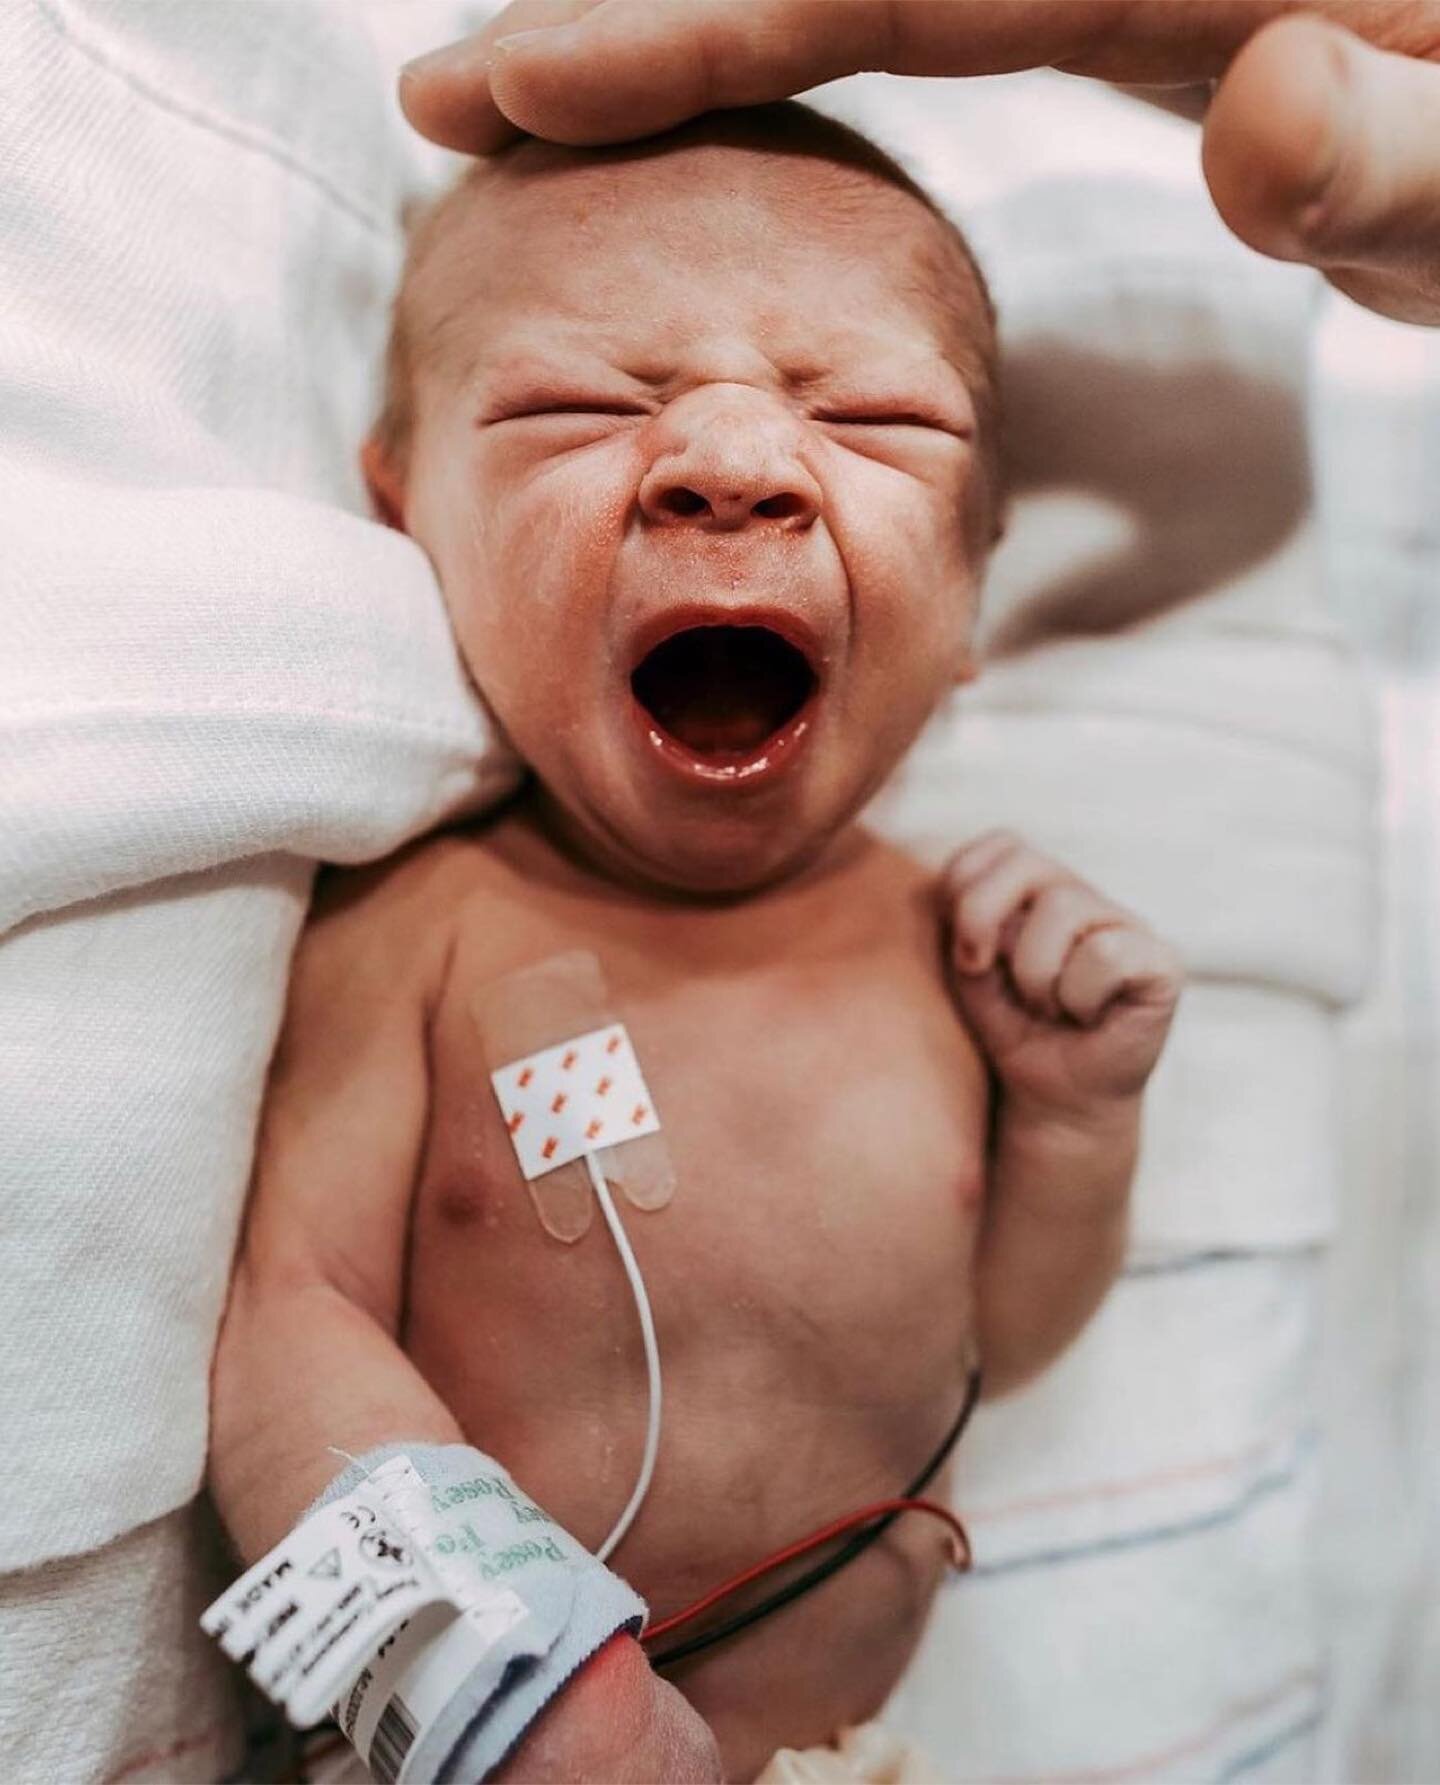 NICU common diagnoses 👶🏽🩺💗

Level 3 &amp; 4 NICUs see a wide range of admissions! Prematurity is usually what you think about regarding the neonatal intensive care unit, but there are so many reasons an infant might need special care including bi